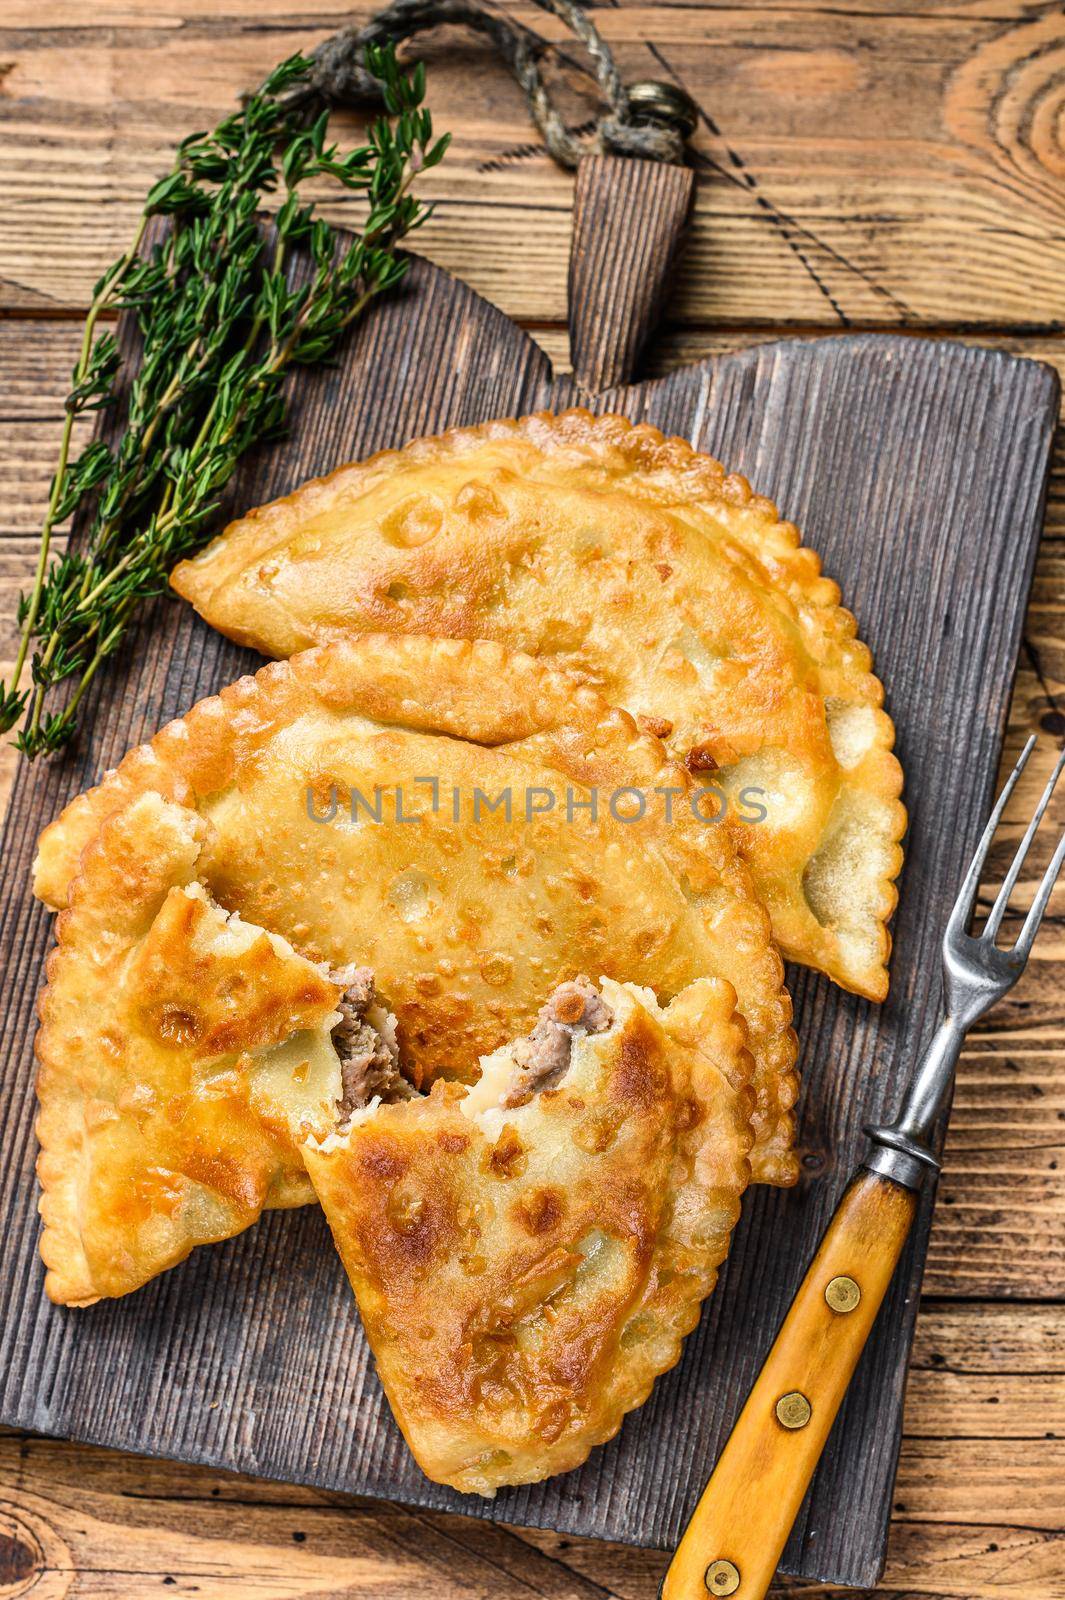 Chilean fried empanadas filled with minced beef meat served on a wooden cutting board. Wooden background. Top view by Composter